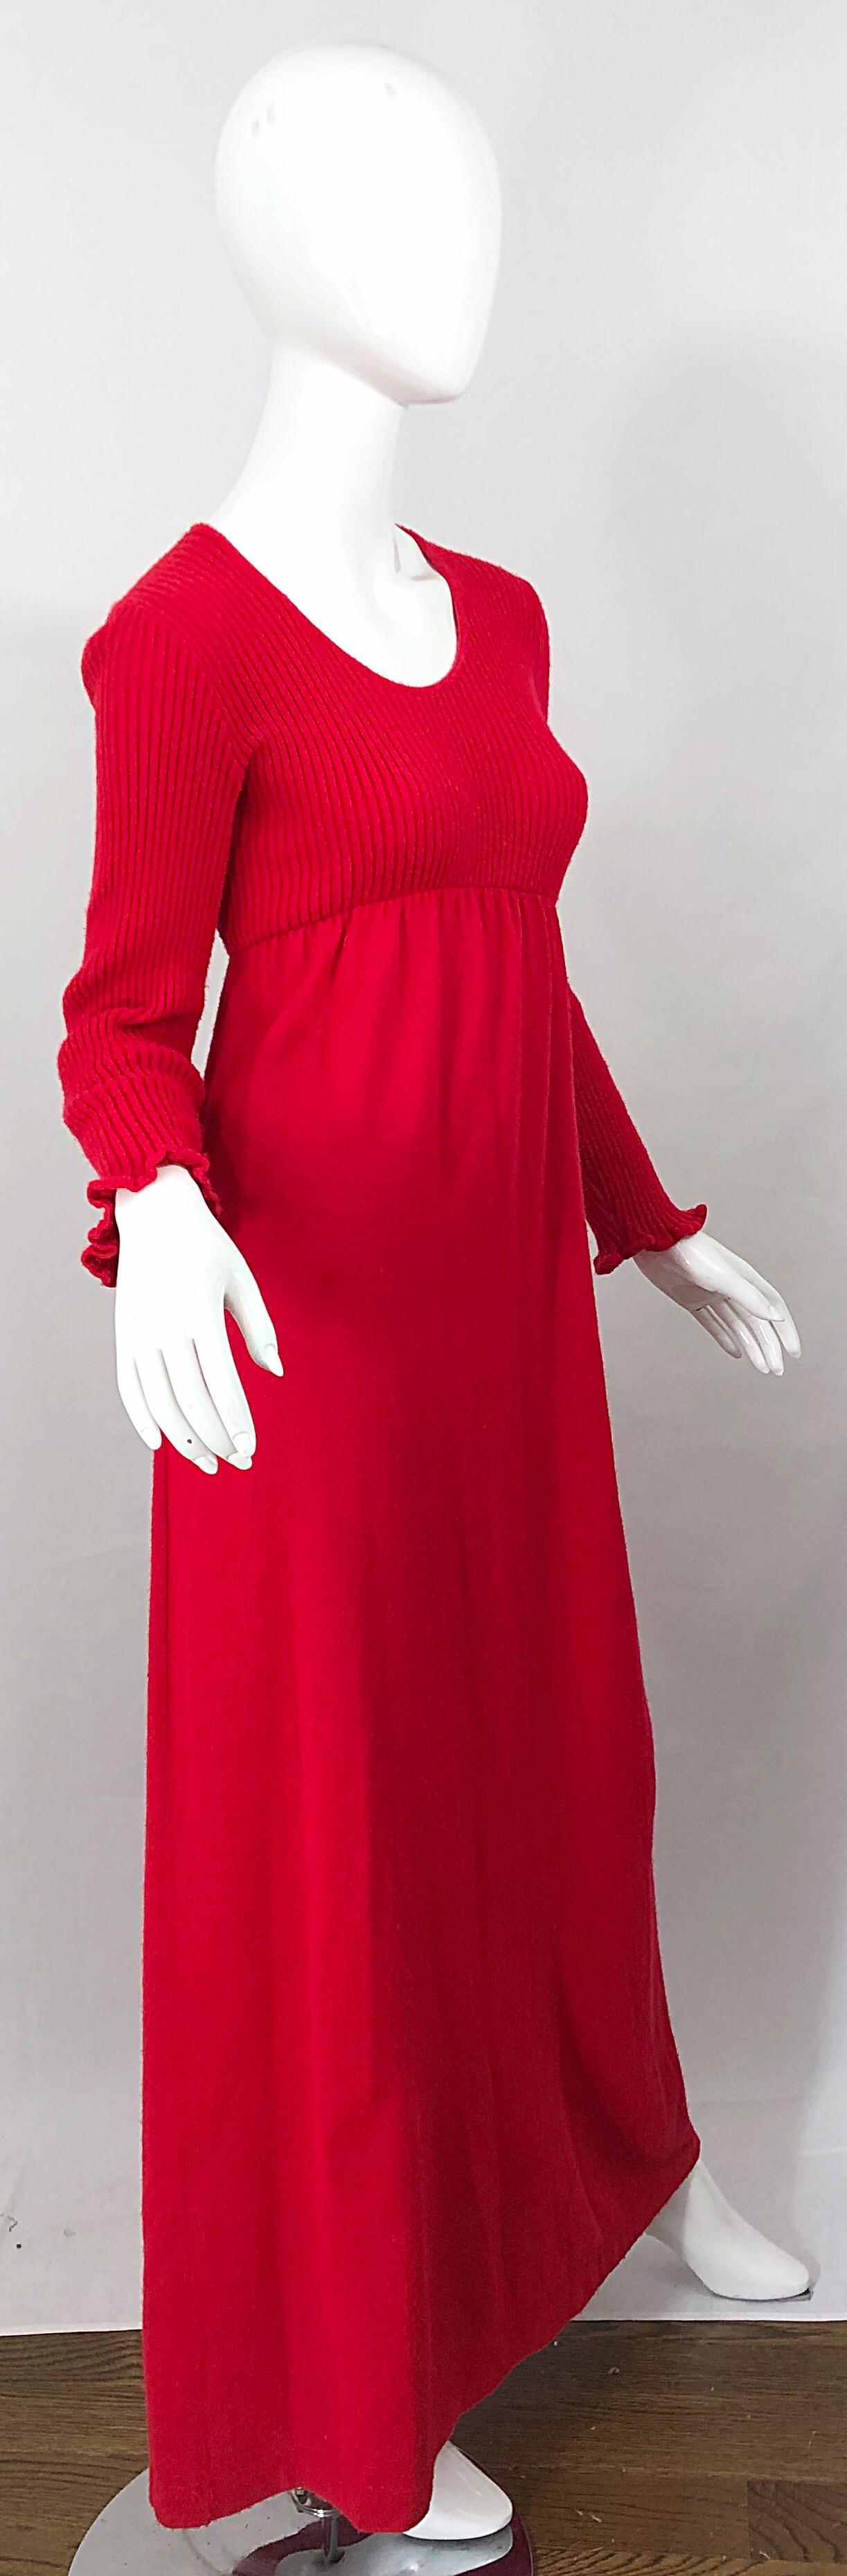 Vintage Joseph Magnin 1970s Lipstick Red Long Sleeve Wool 70s Sweater Maxi Dress For Sale 4